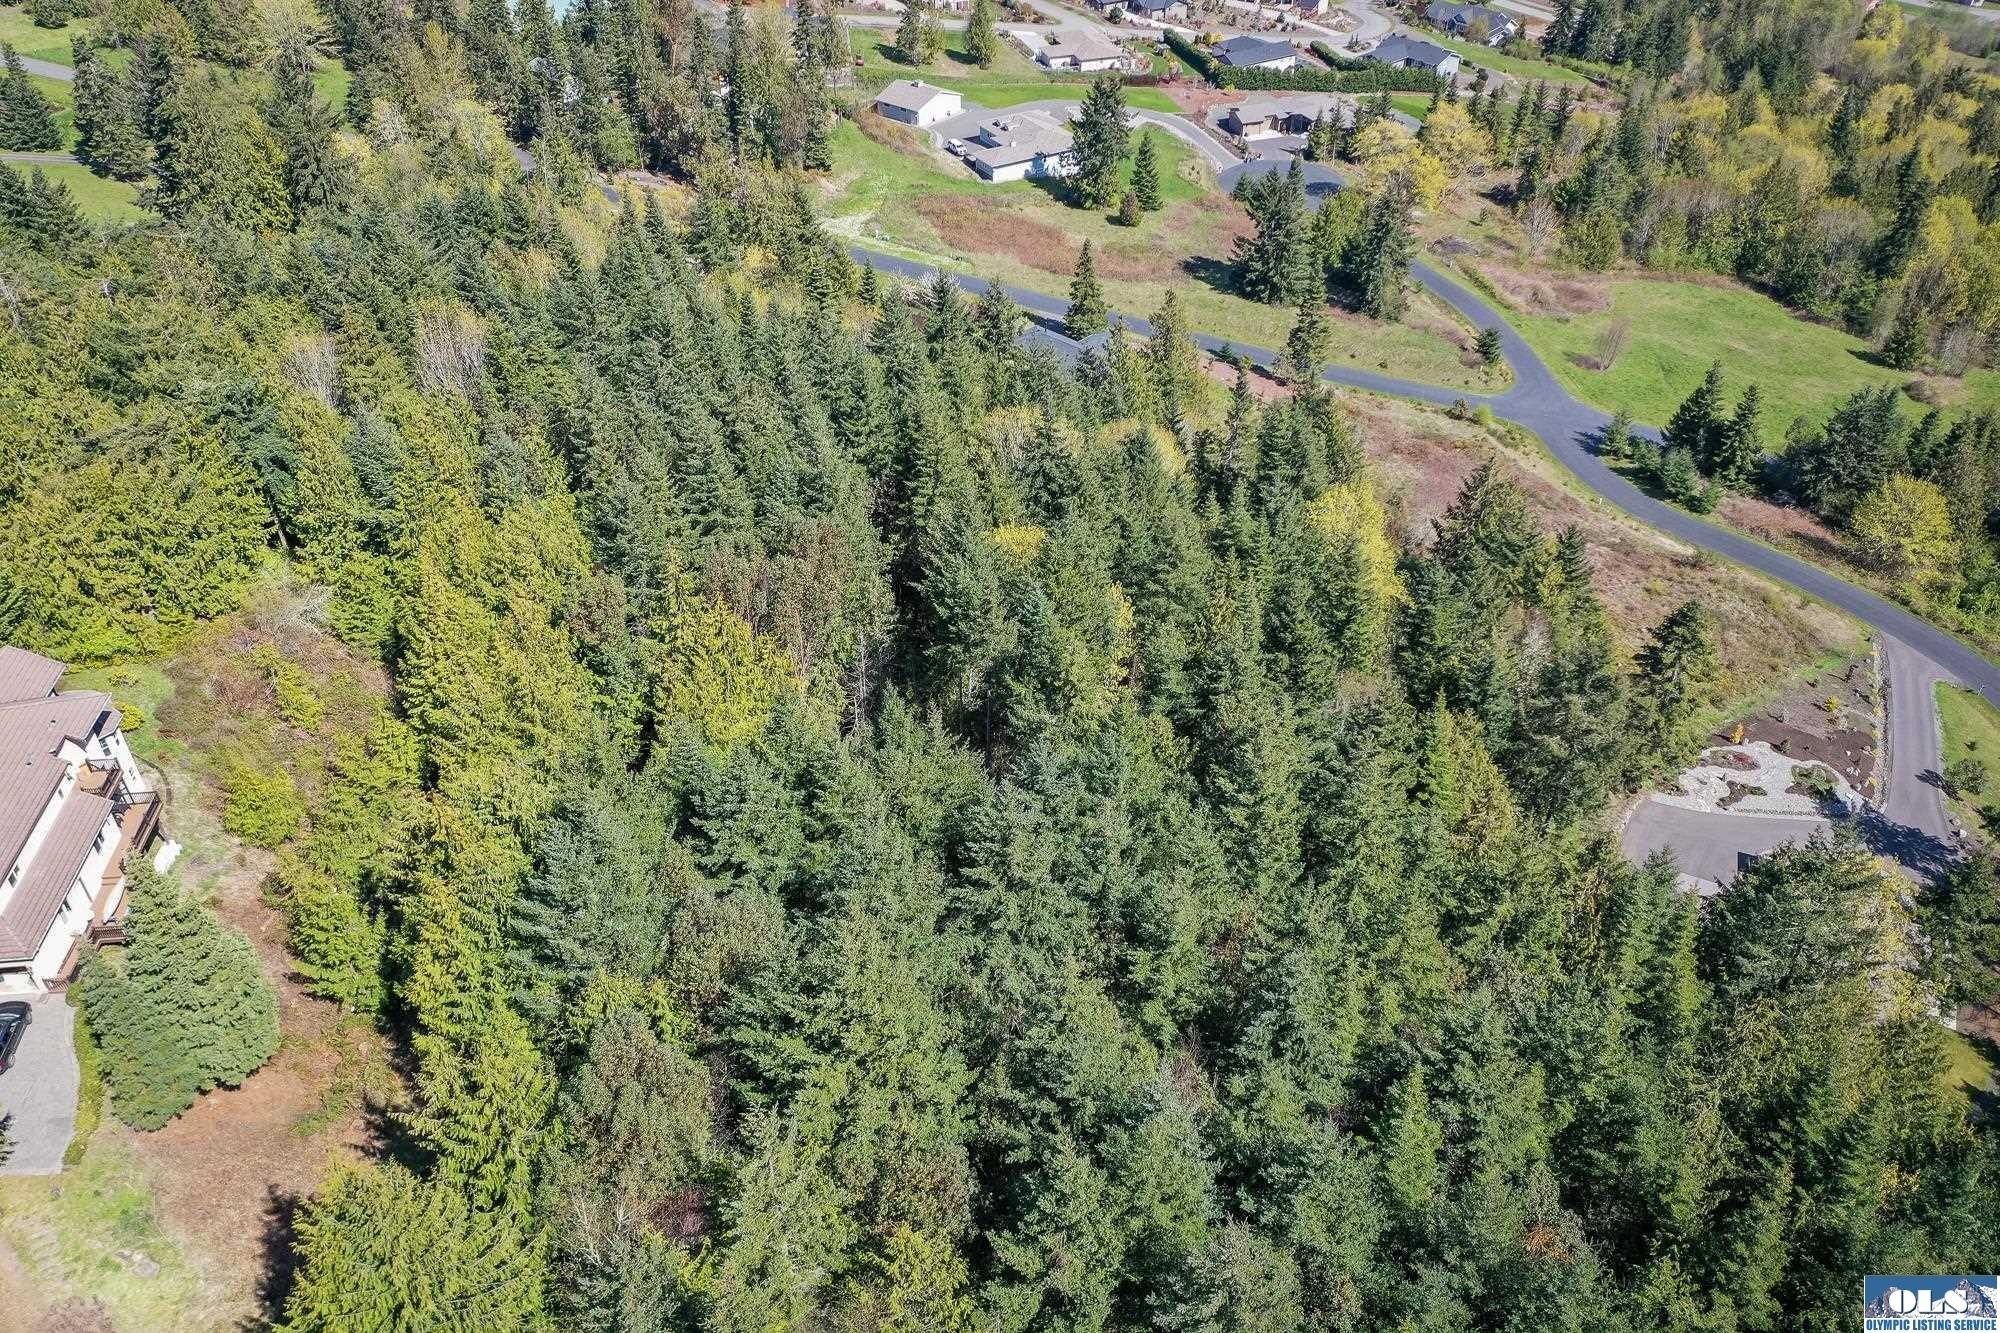 8. Lot 15 High View Way